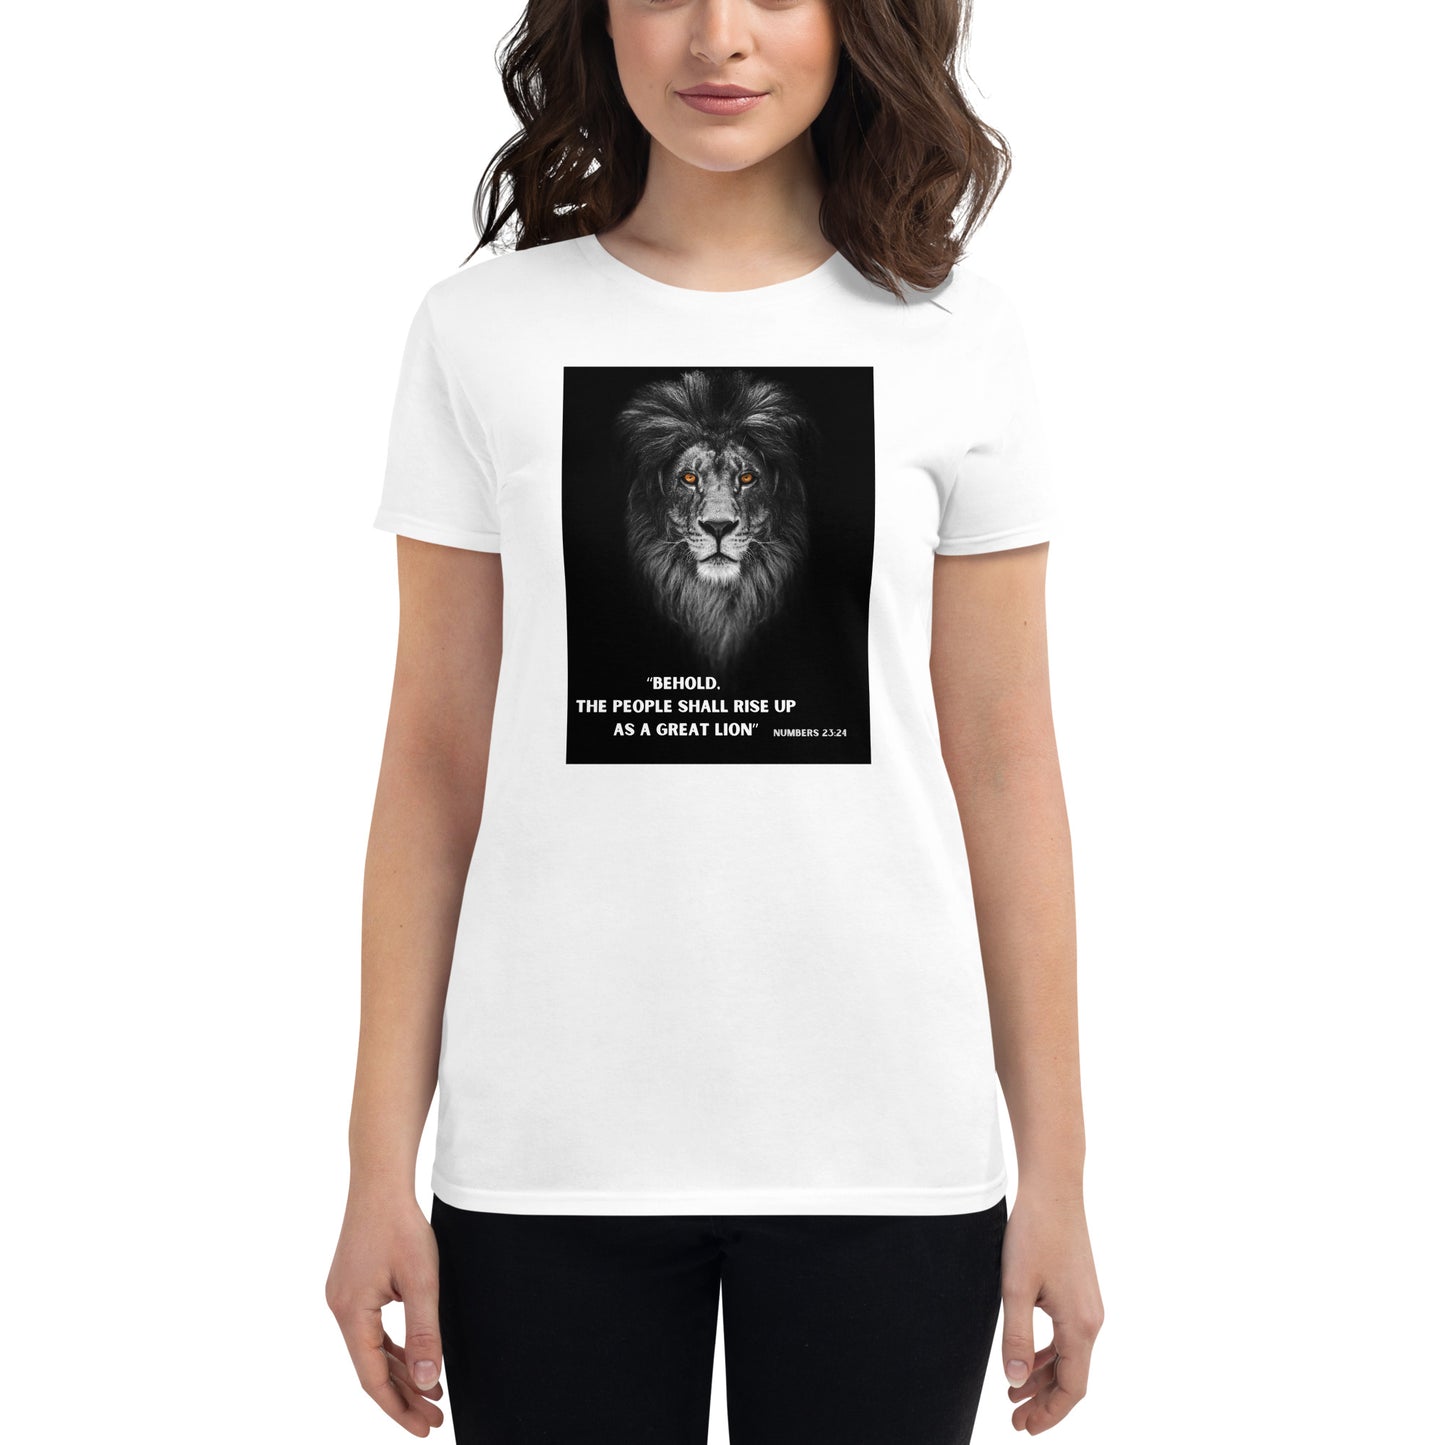 The people shall rise up! (English) - Women's short sleeve t-shirt (5 colors)